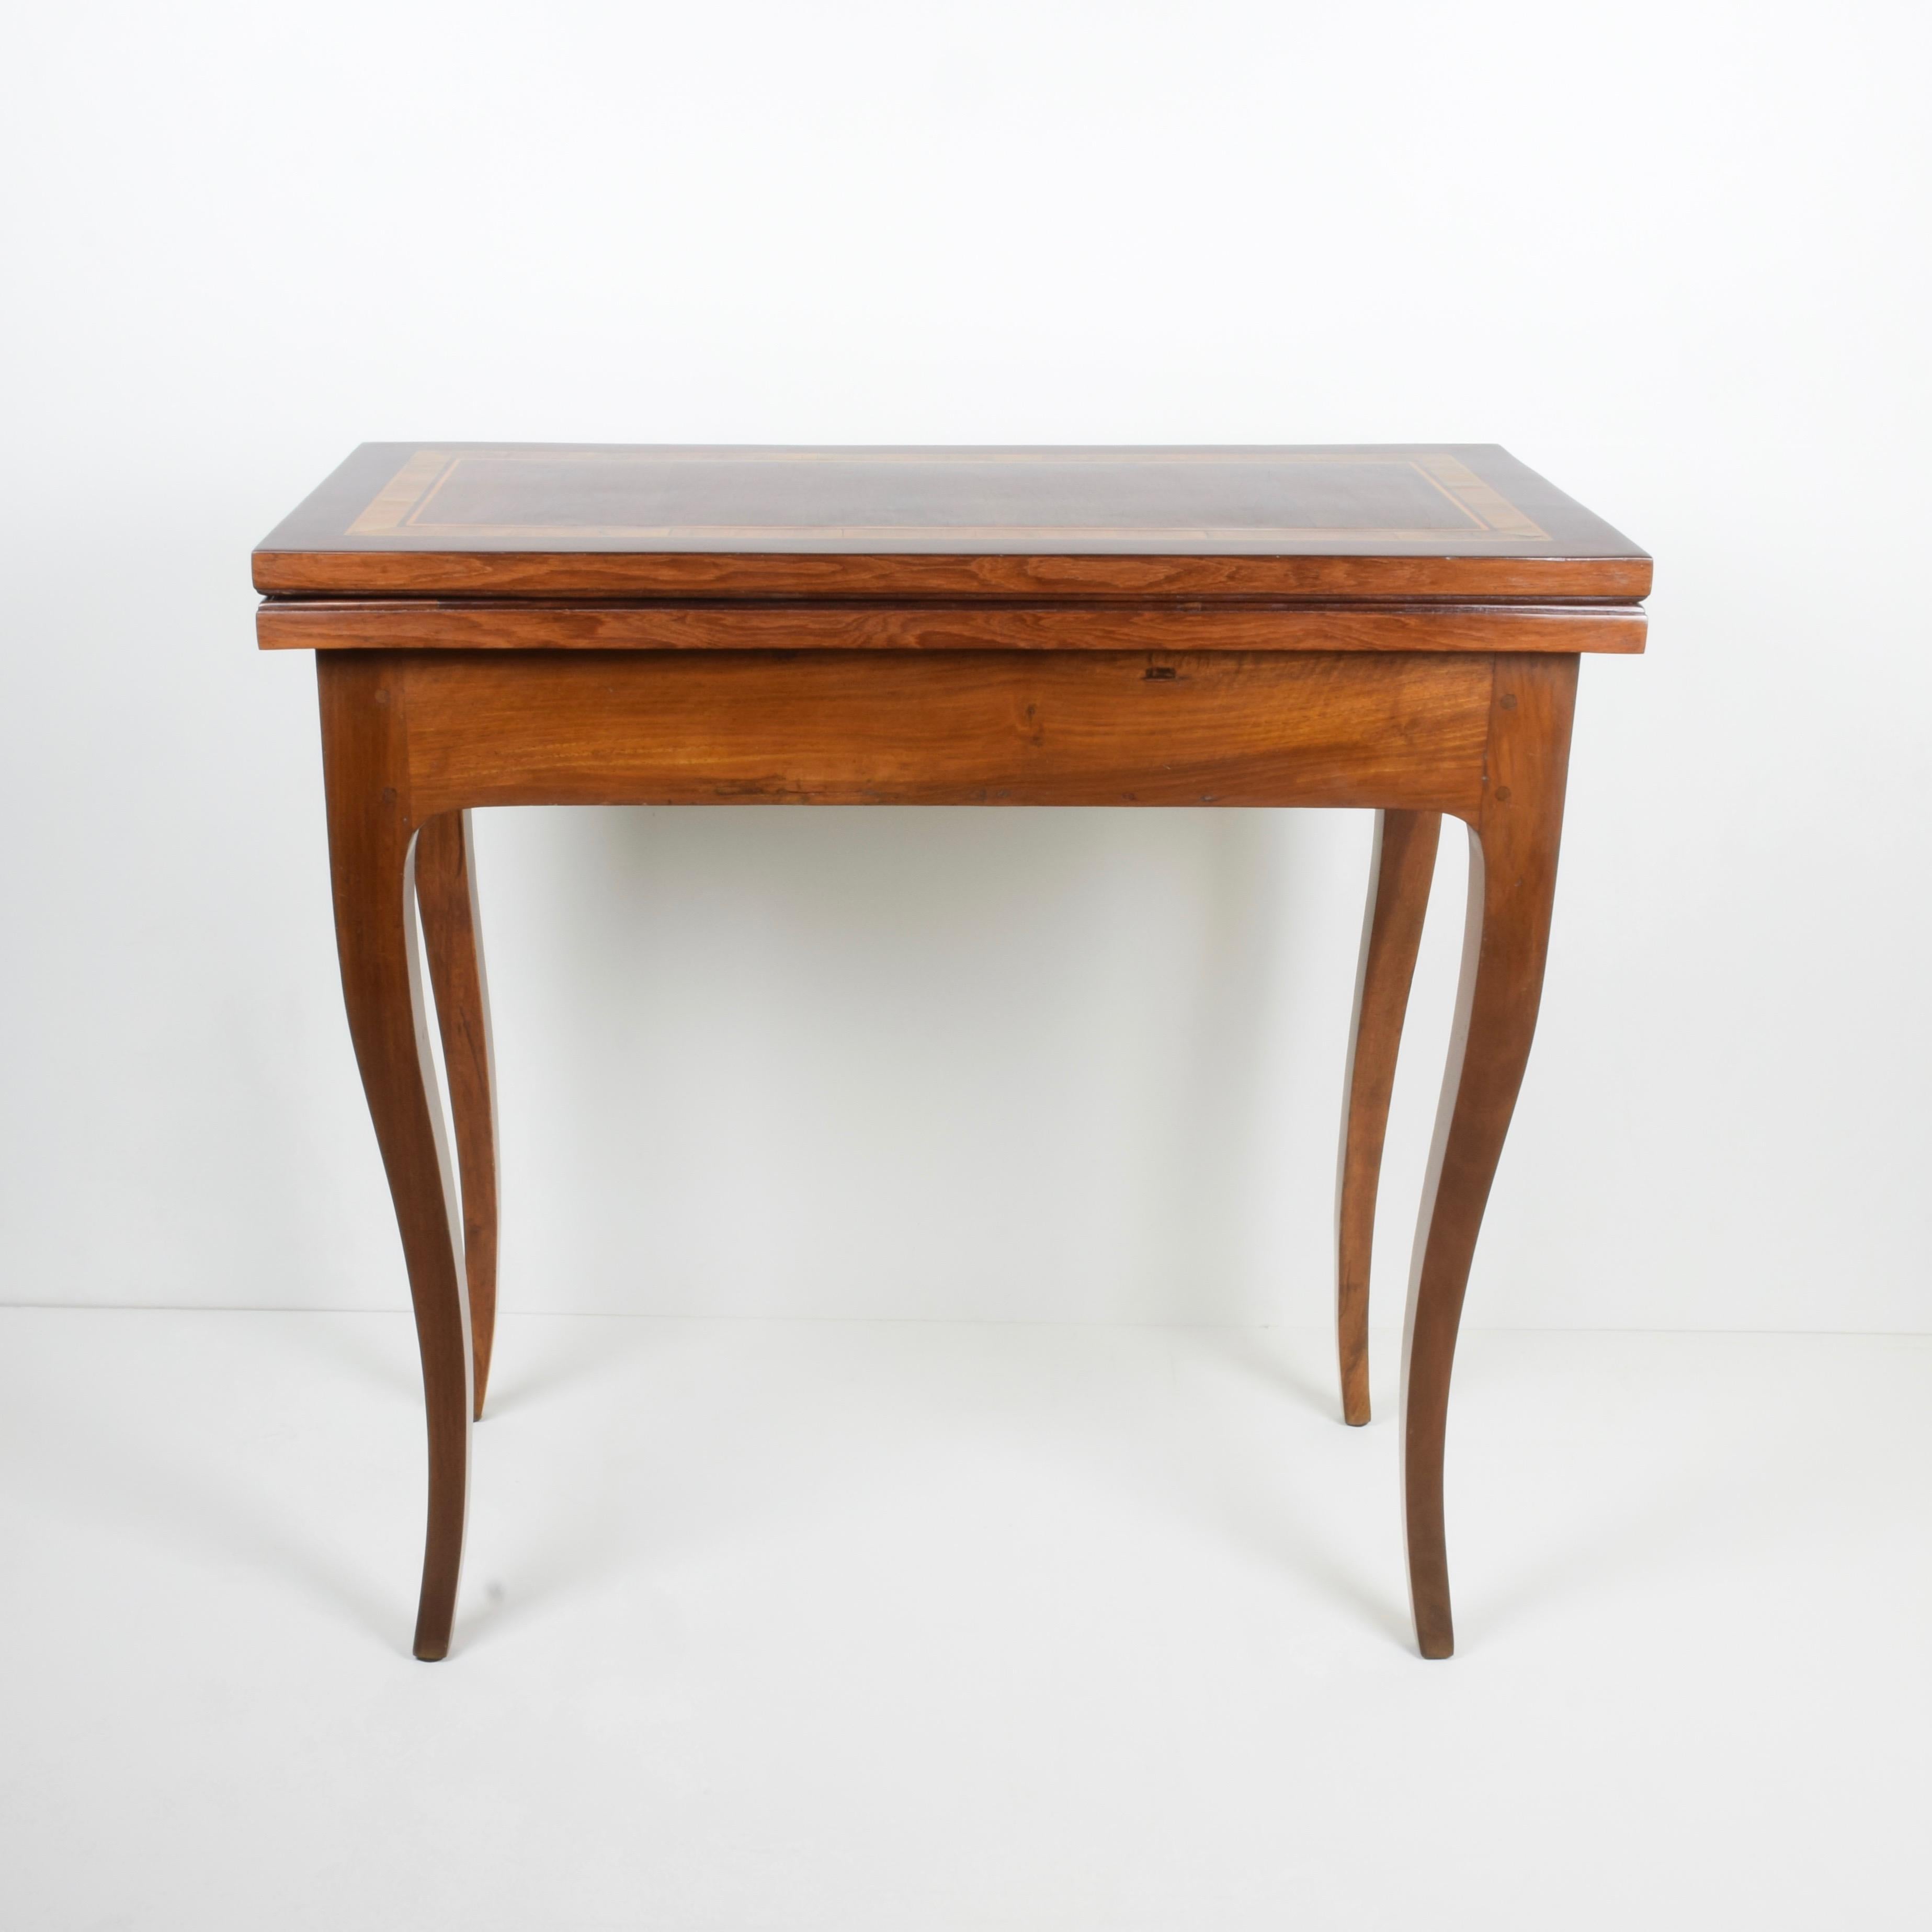 Italy, Tuscany, around 1780
Elegant game table console side table in solid walnut with one side drawer.
Top veneered in mahogany, rosewood, olive and maple.
Dimensions: cm W 82 x D 41 x H 79.